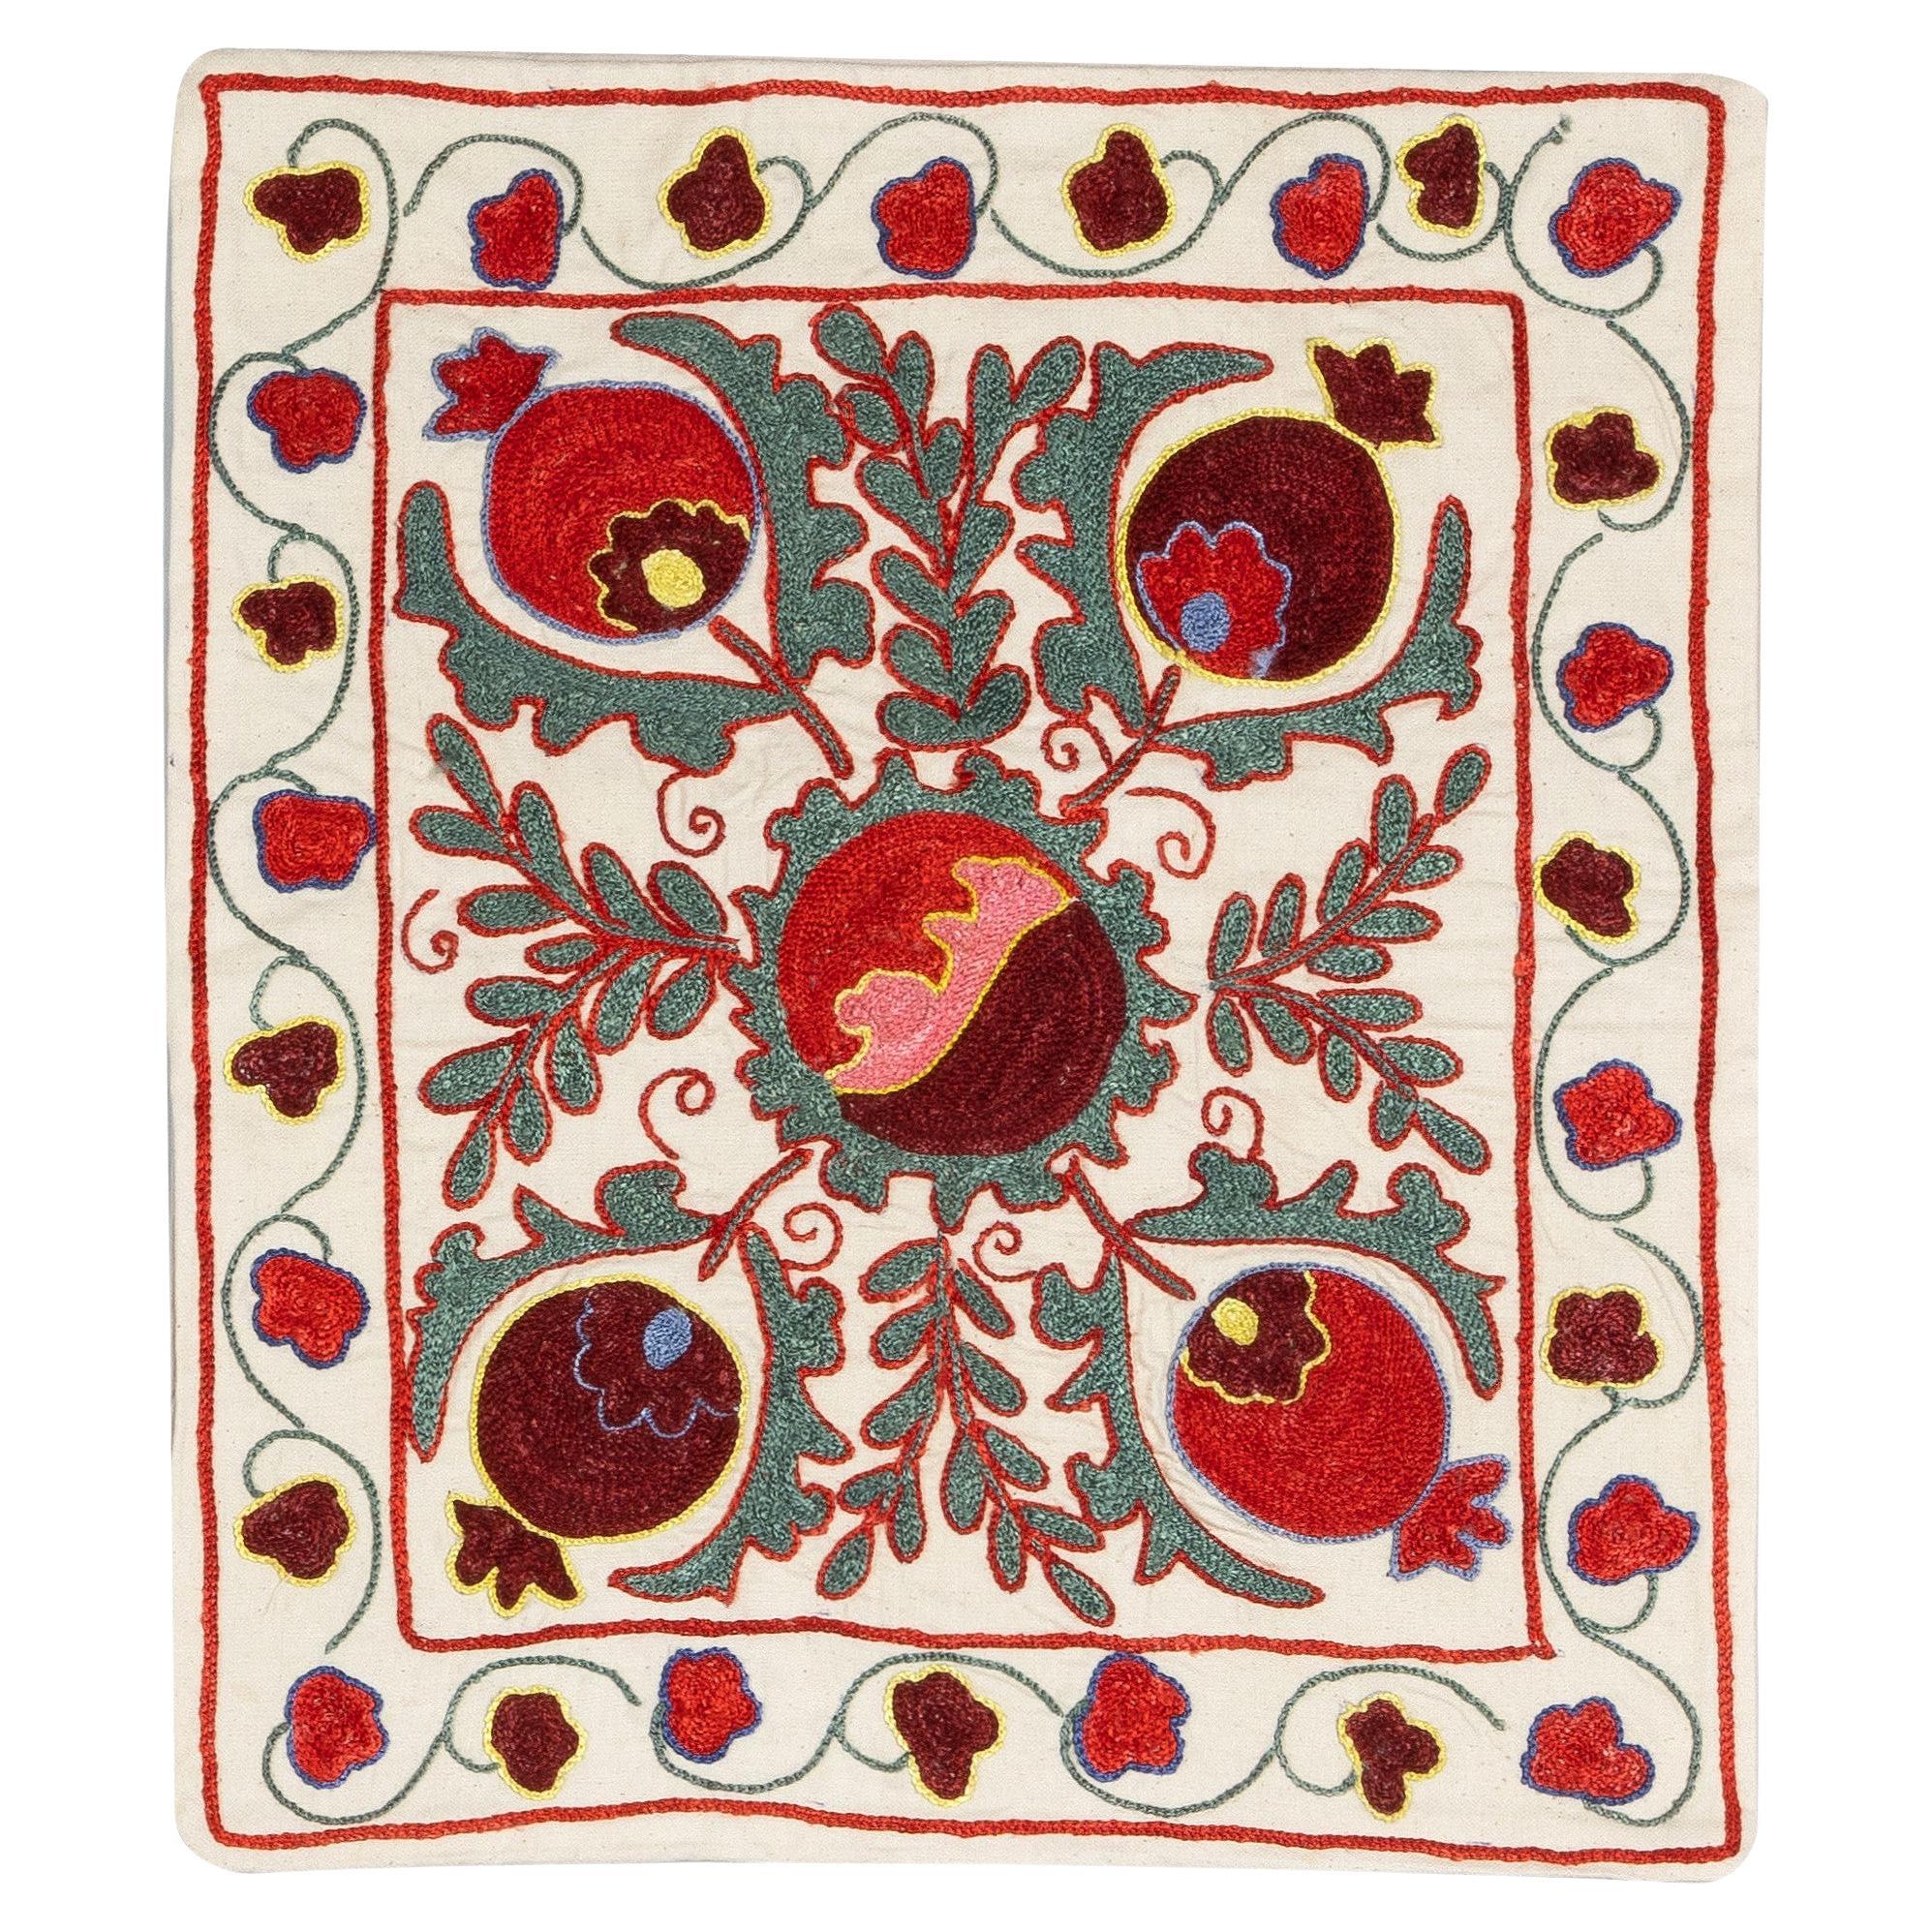 19"x19" Decorative Silk Embroidered Suzani Cushion Cover in Red, Green and Cream For Sale